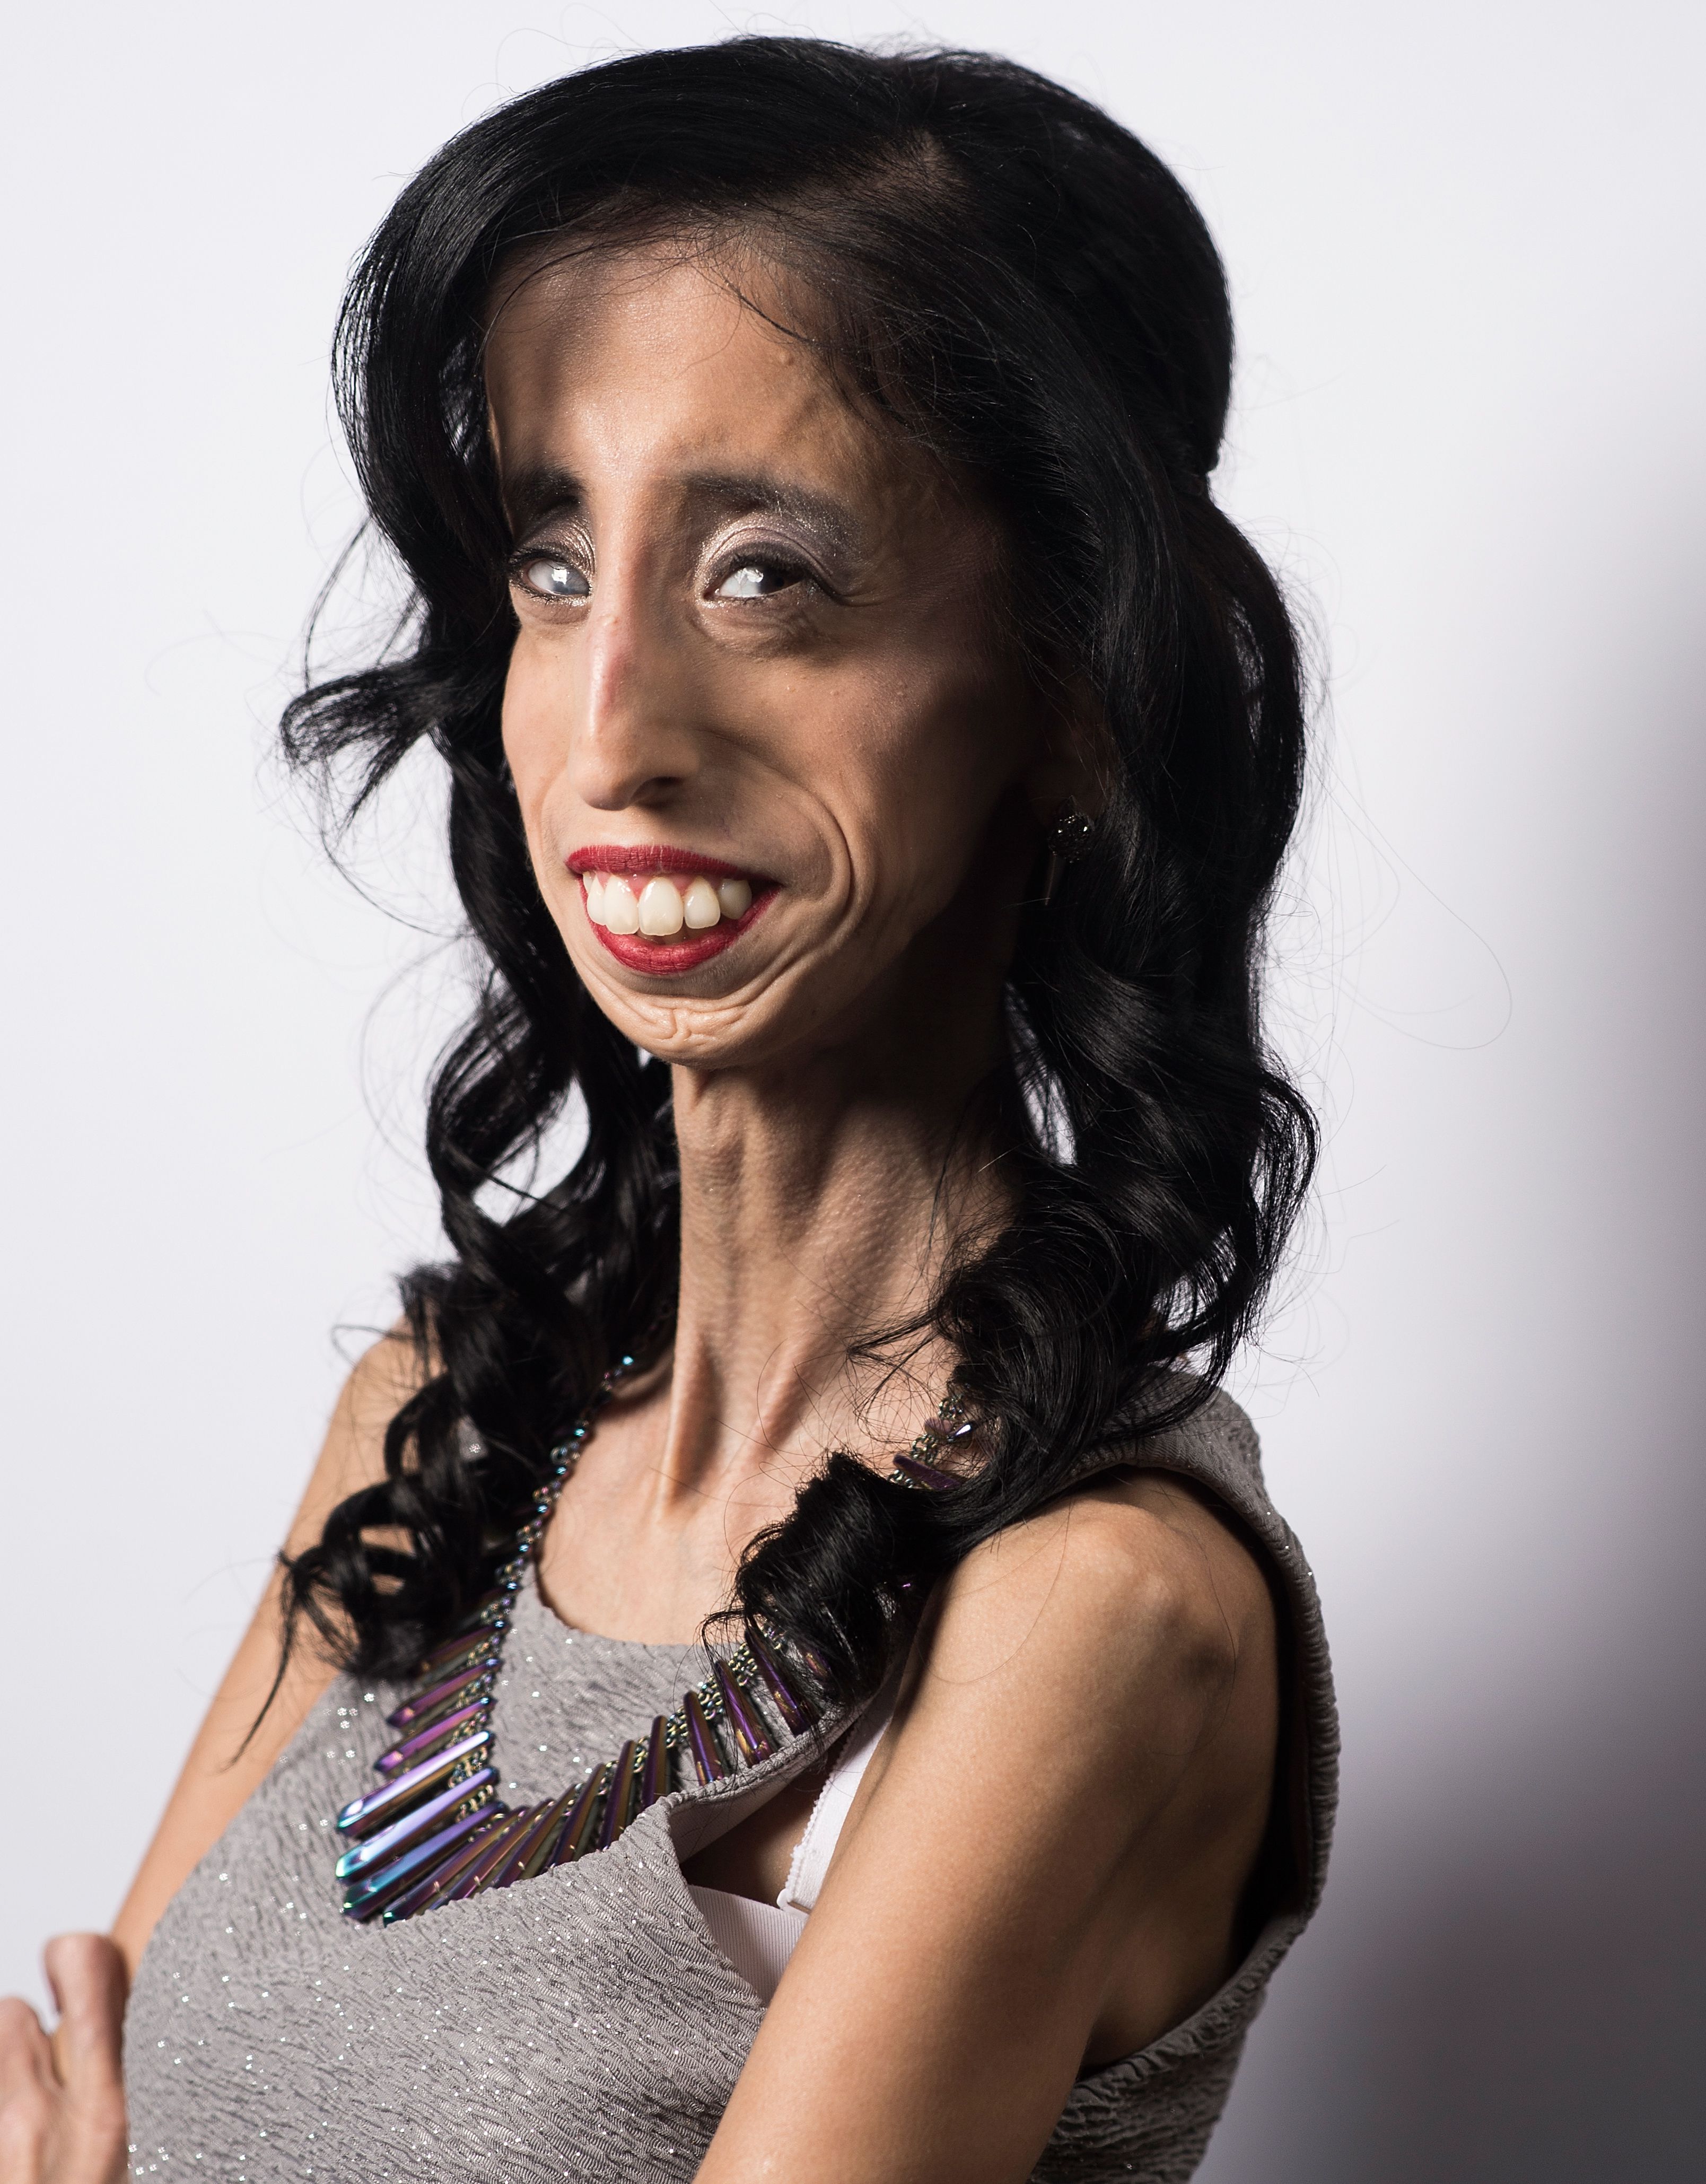 The the world ugliest and man in woman 15 Countries